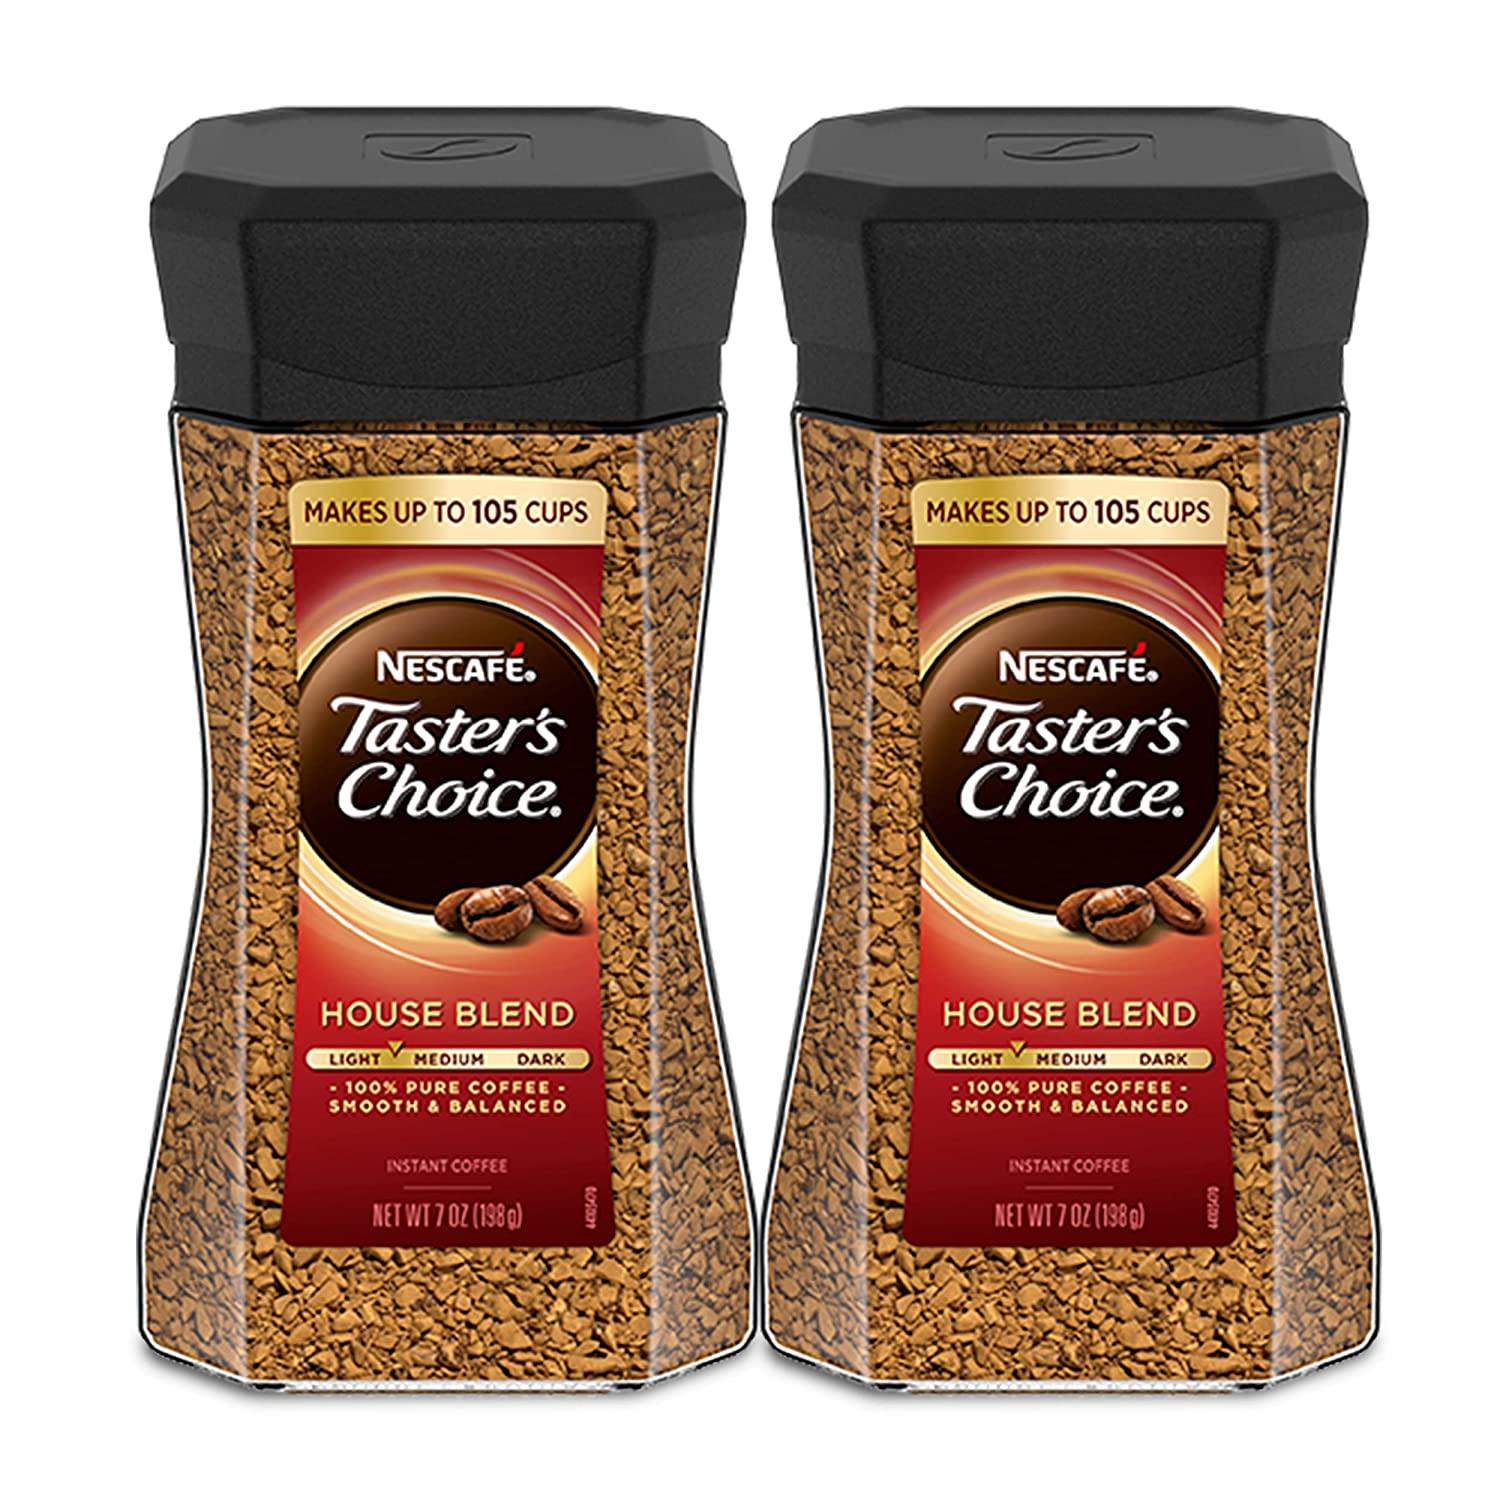 Nescafe Tasters Choice House Blend Instant Coffee 2 Pack for $11.32 Shipped